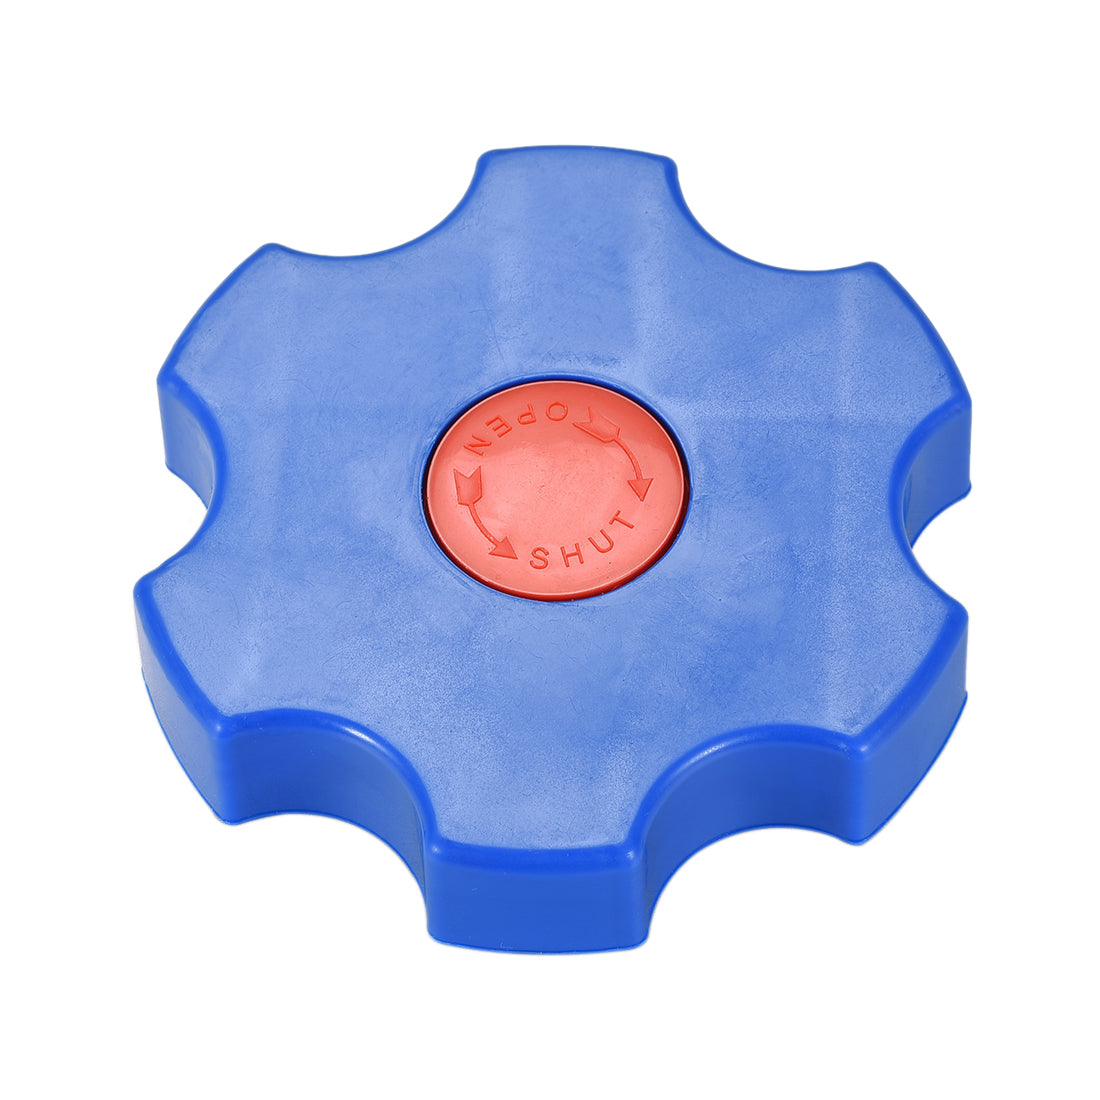 uxcell Uxcell Round Wheel Handle, Square Broach 9x9mm, Wheel OD 105mm ABS Blue Red 1Pcs